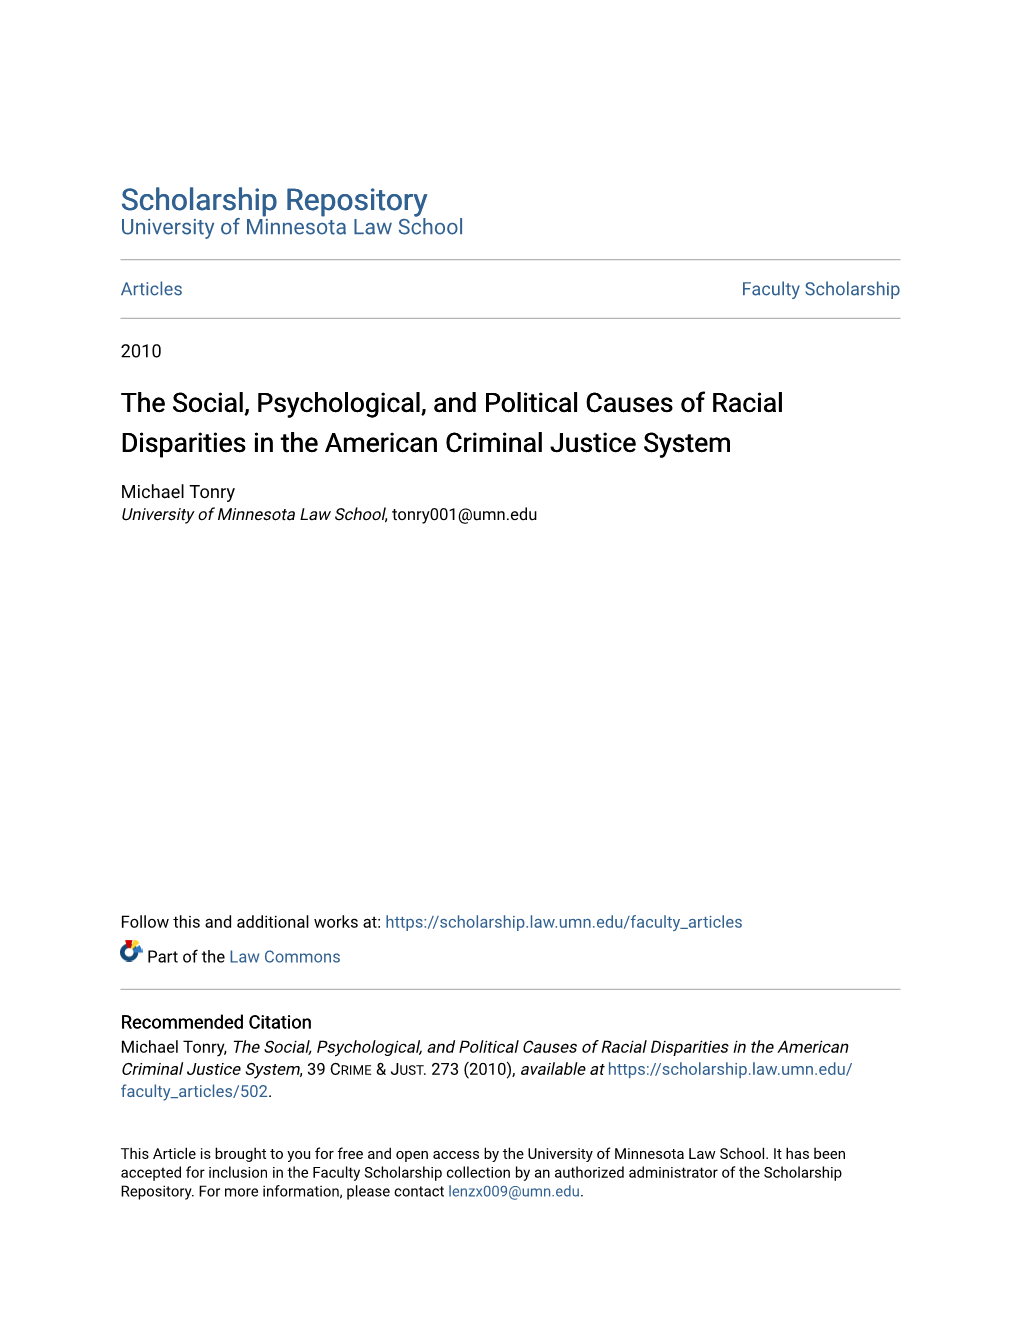 The Social, Psychological, and Political Causes of Racial Disparities in the American Criminal Justice System